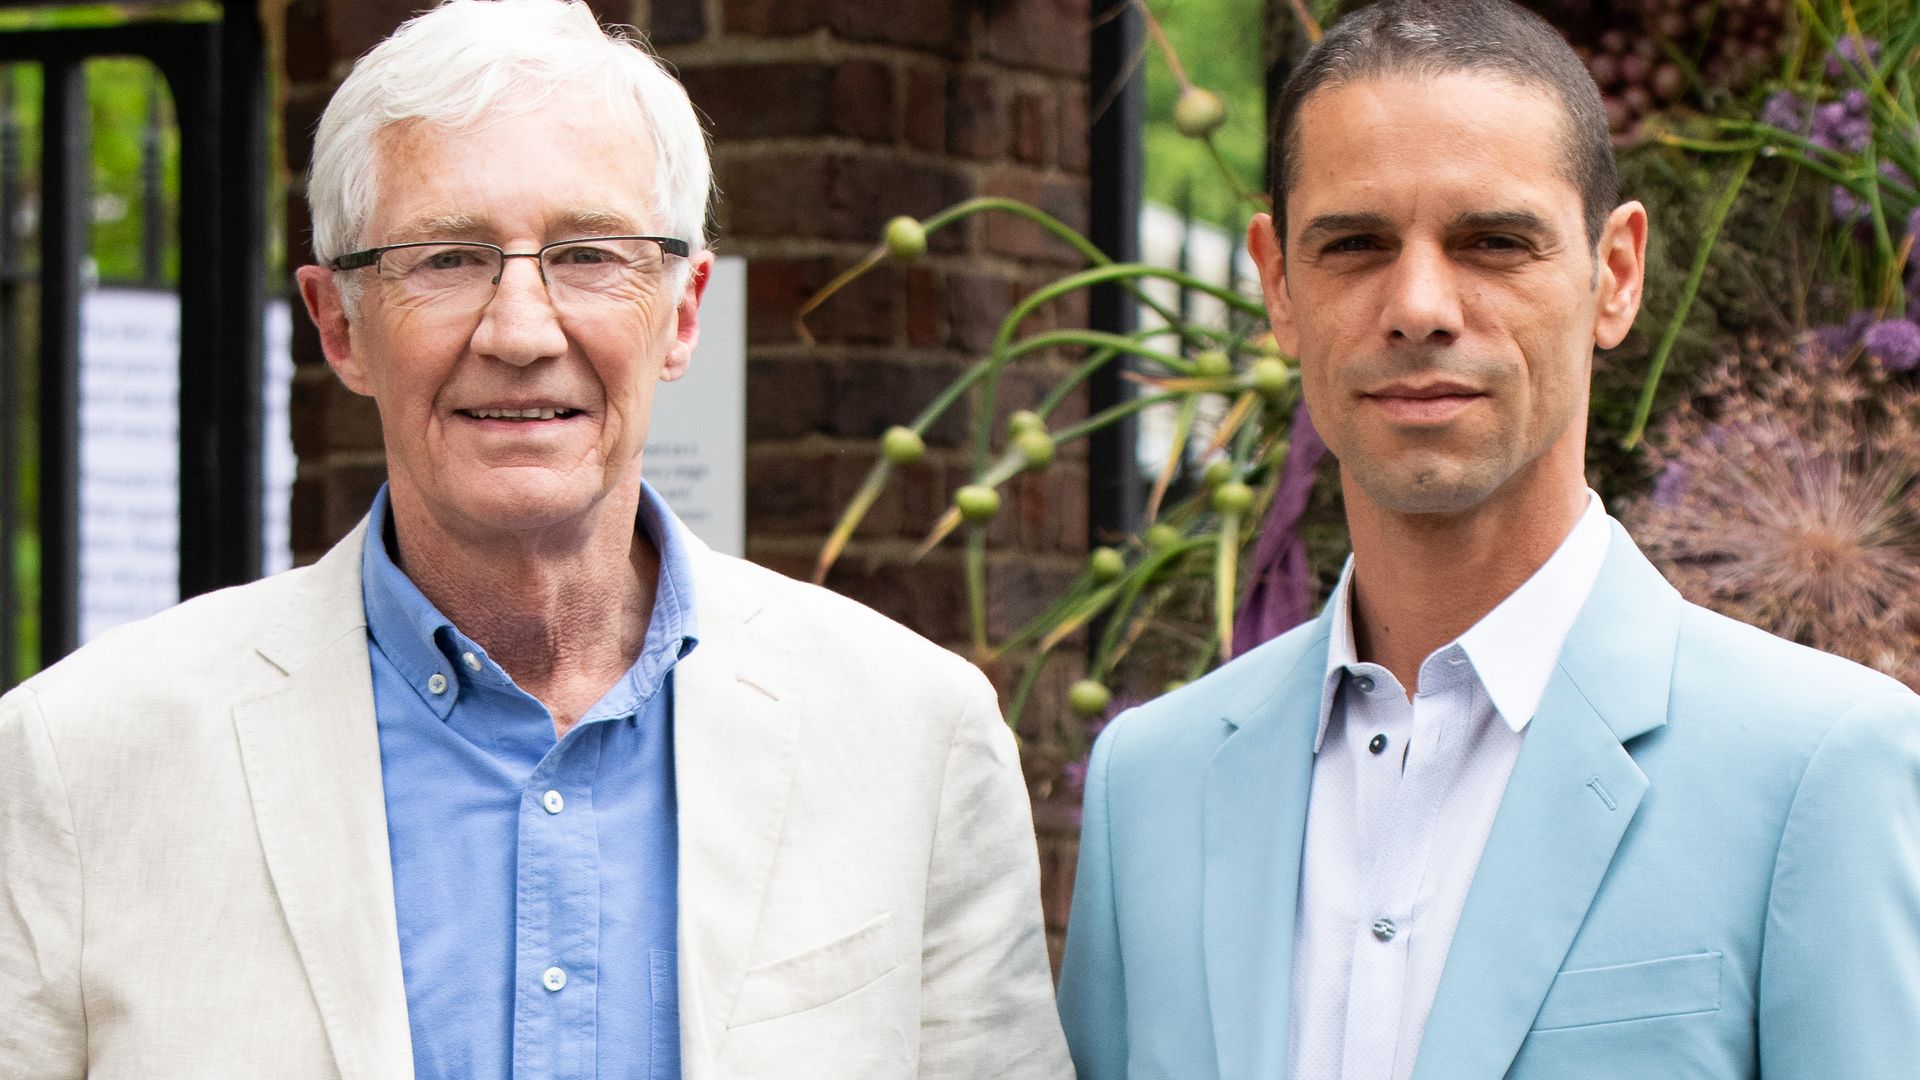 Paul O'Grady wears a cream Etro jacket with Andre Portasio wearing a Sandro blue suit and Dolce & Gabbana shirt